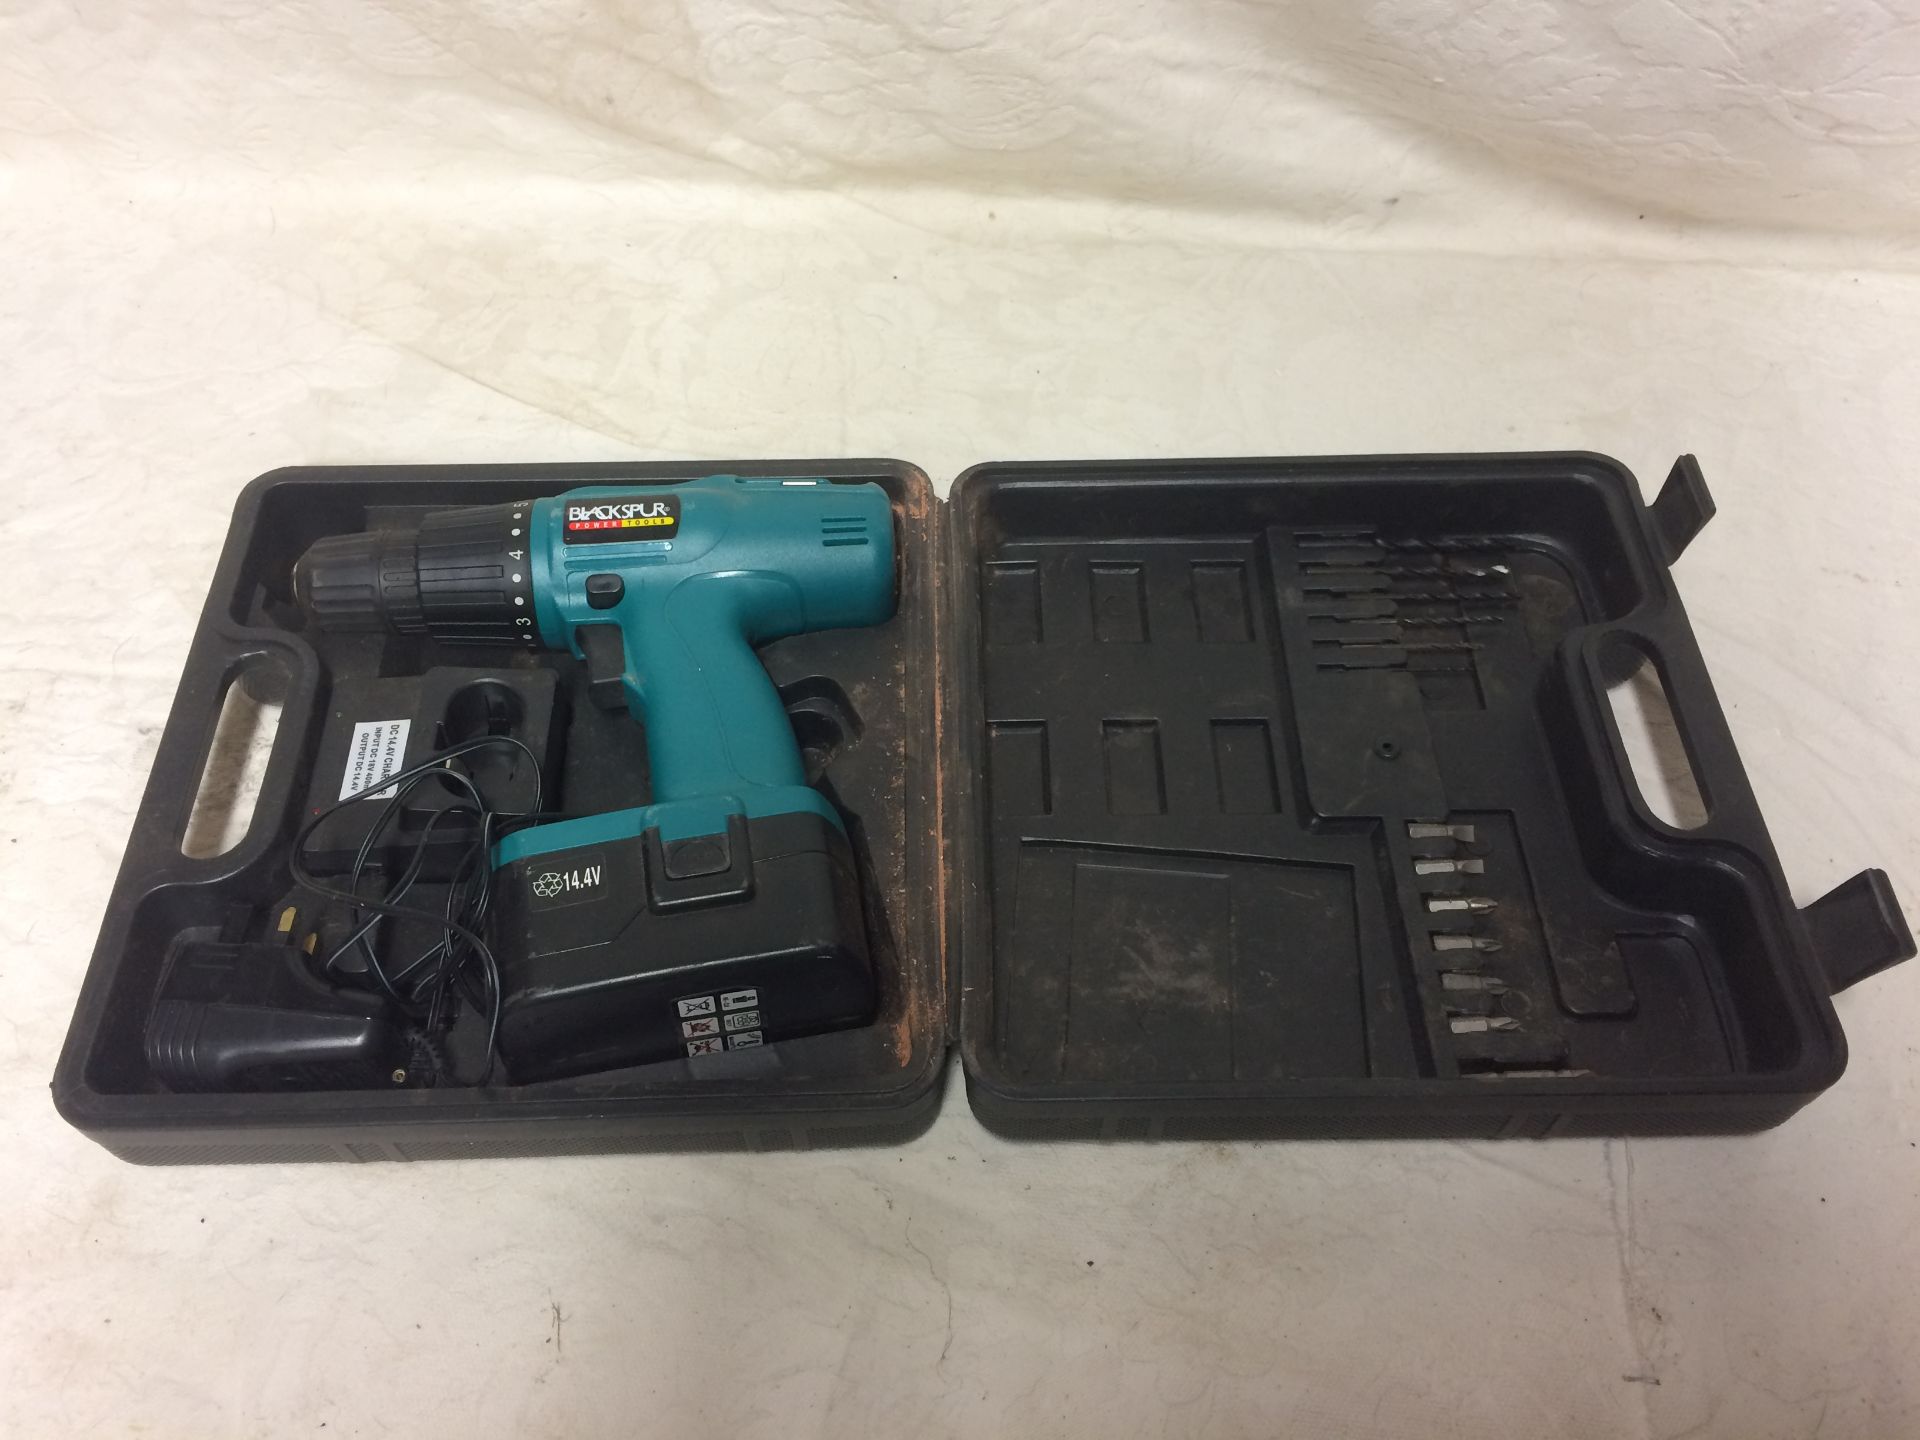 Black Spur 14.4v Cordless Drill c/w Charger and Case